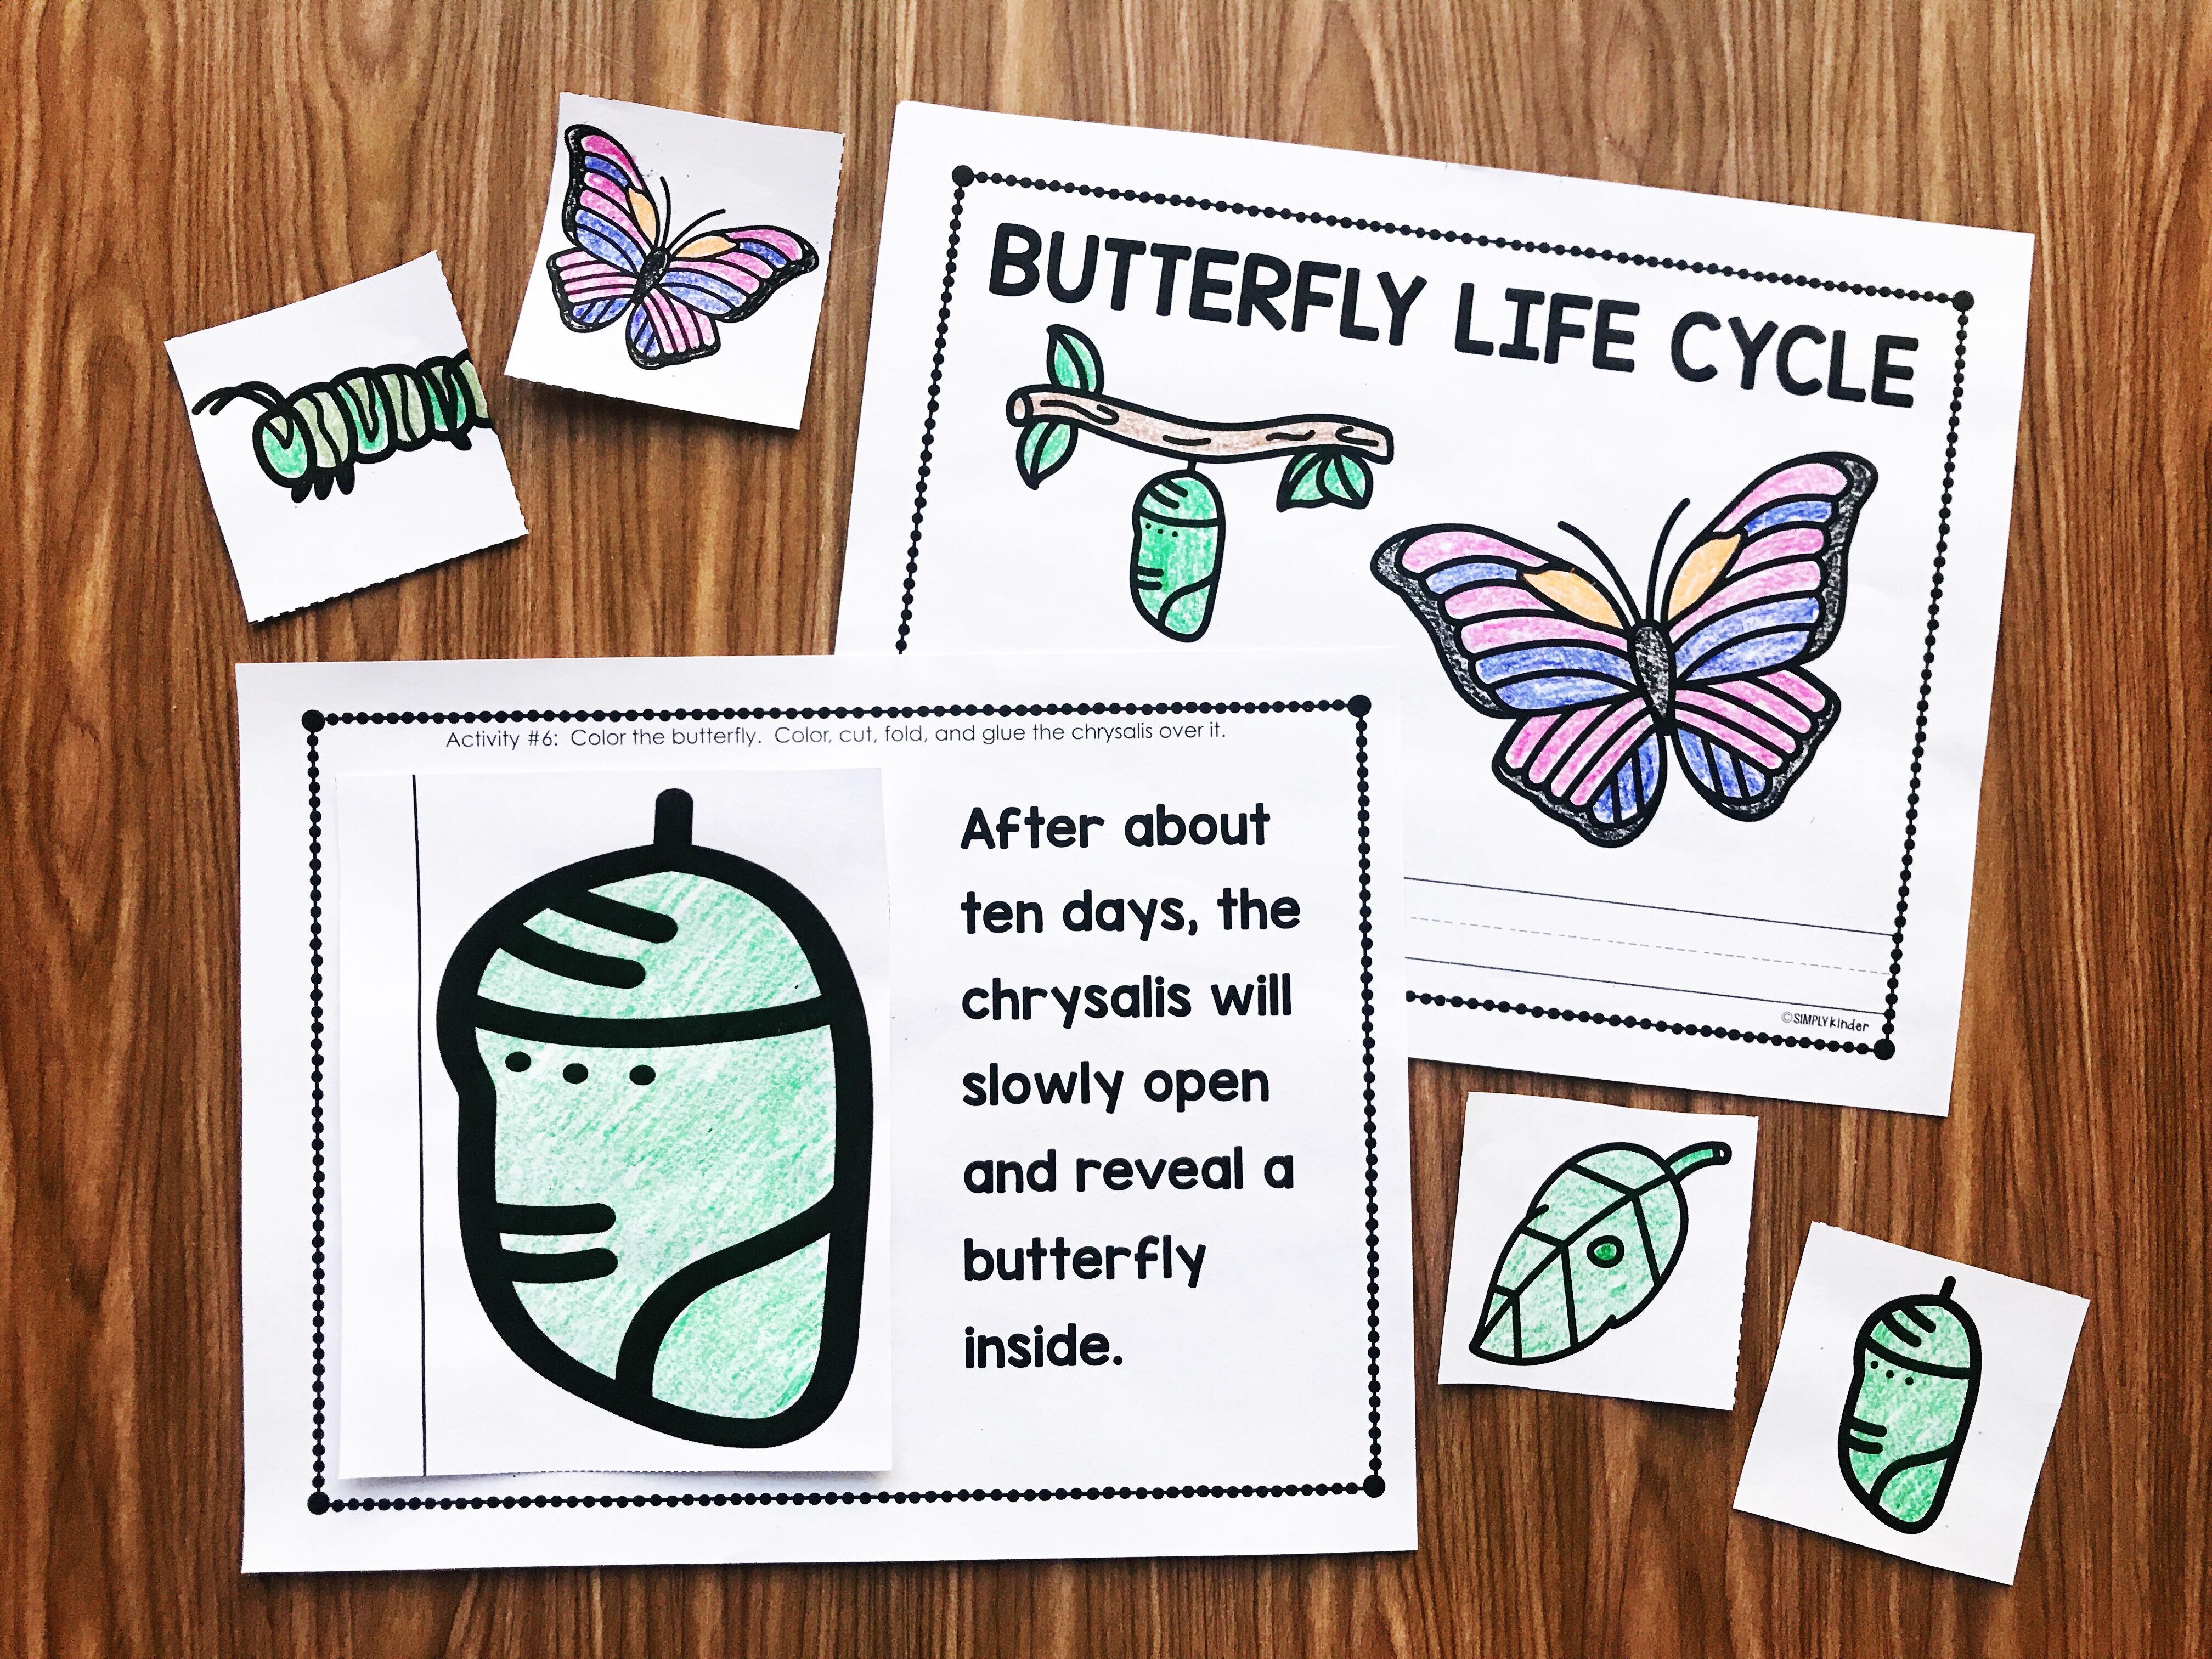 Your preschool, kindergarten, and first grade students will love this interactive Butterfly Life Cycle book from Simply Kinder.